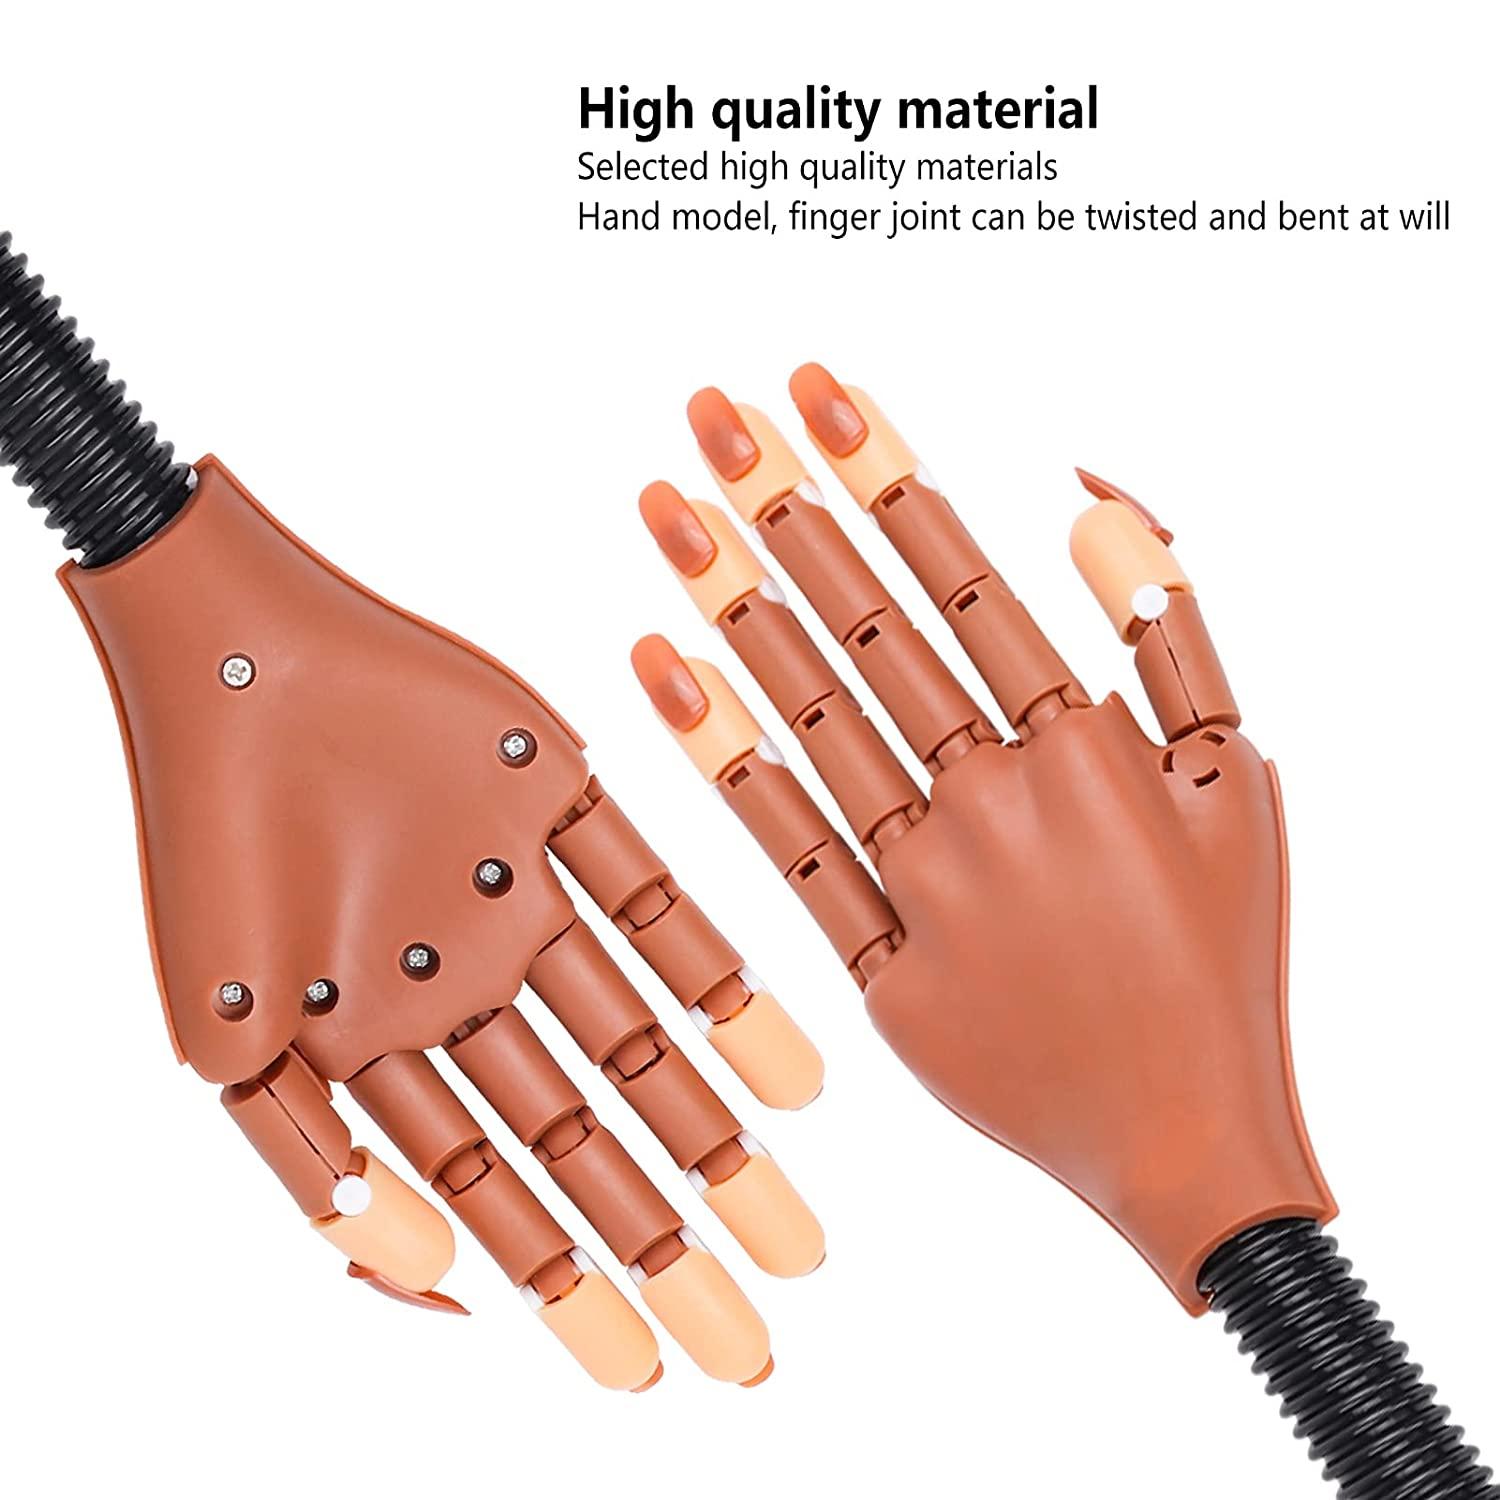 Veikmv Nail Training Practice Hand For Acrylic Nails Silicone Fake Hands To Nail  Practice Hand Model Filming Props - AliExpress